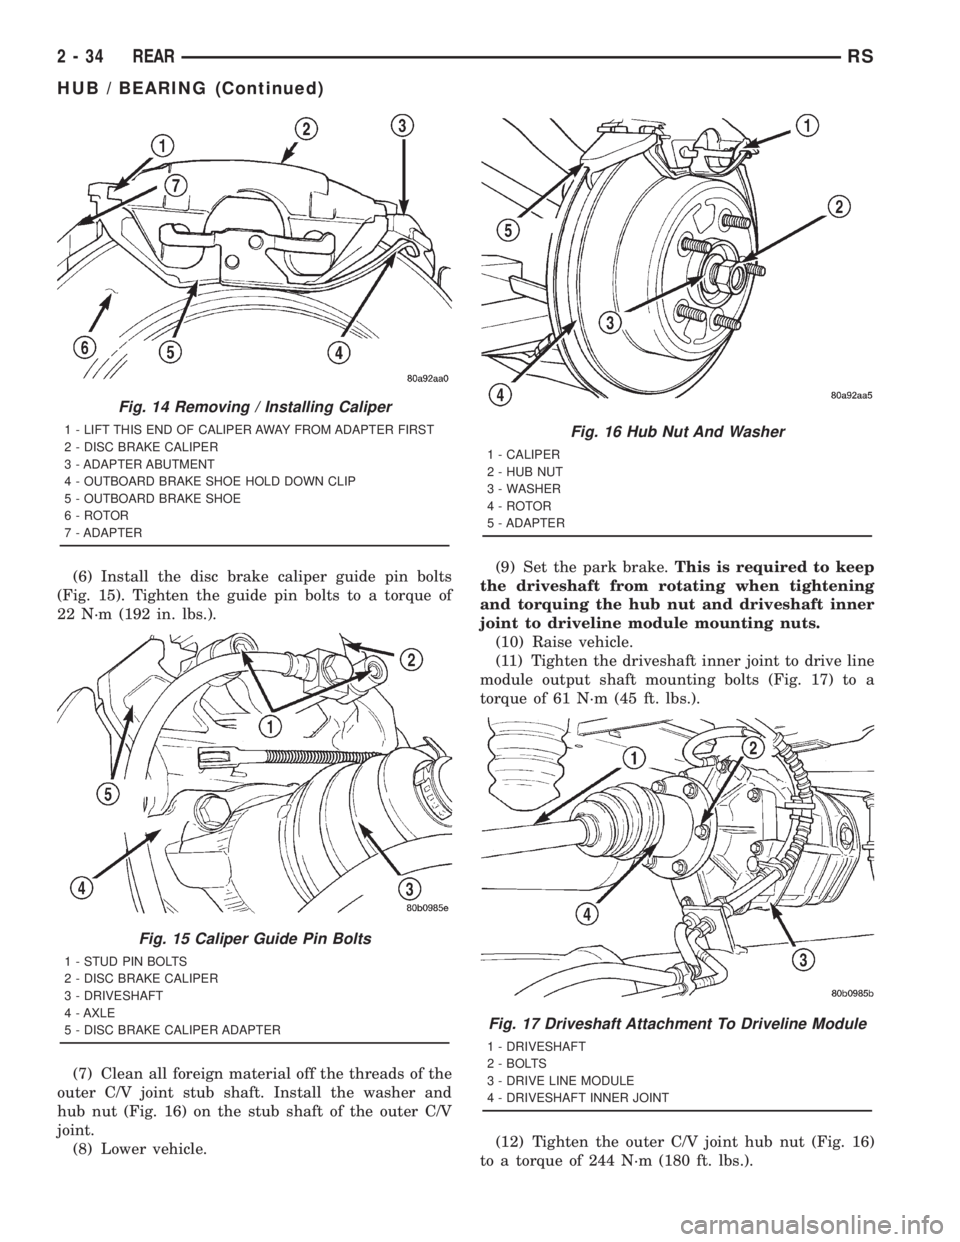 CHRYSLER VOYAGER 2001  Service Manual (6) Install the disc brake caliper guide pin bolts
(Fig. 15). Tighten the guide pin bolts to a torque of
22 N´m (192 in. lbs.).
(7) Clean all foreign material off the threads of the
outer C/V joint s